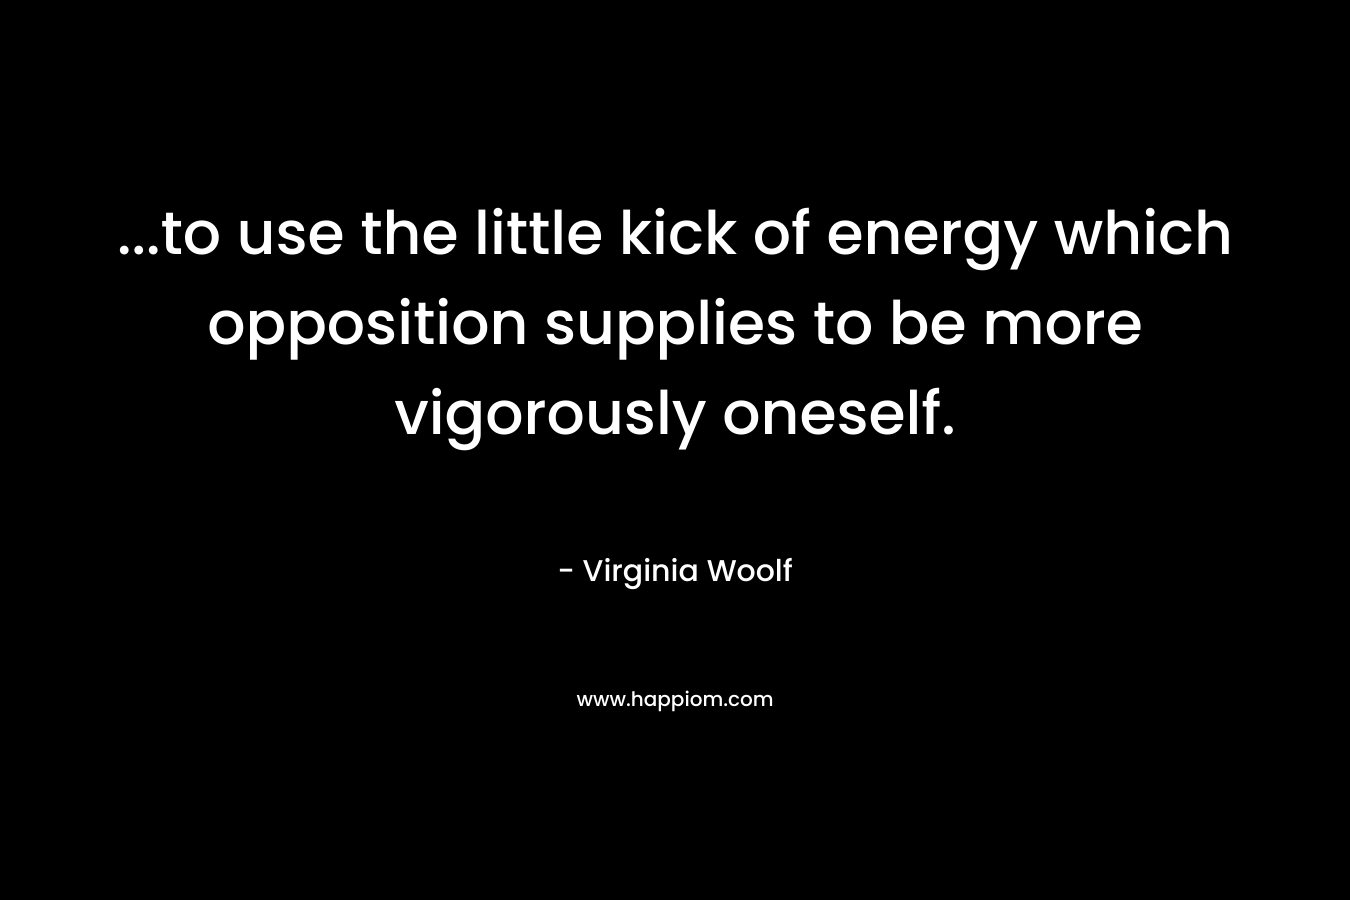 …to use the little kick of energy which opposition supplies to be more vigorously oneself. – Virginia Woolf